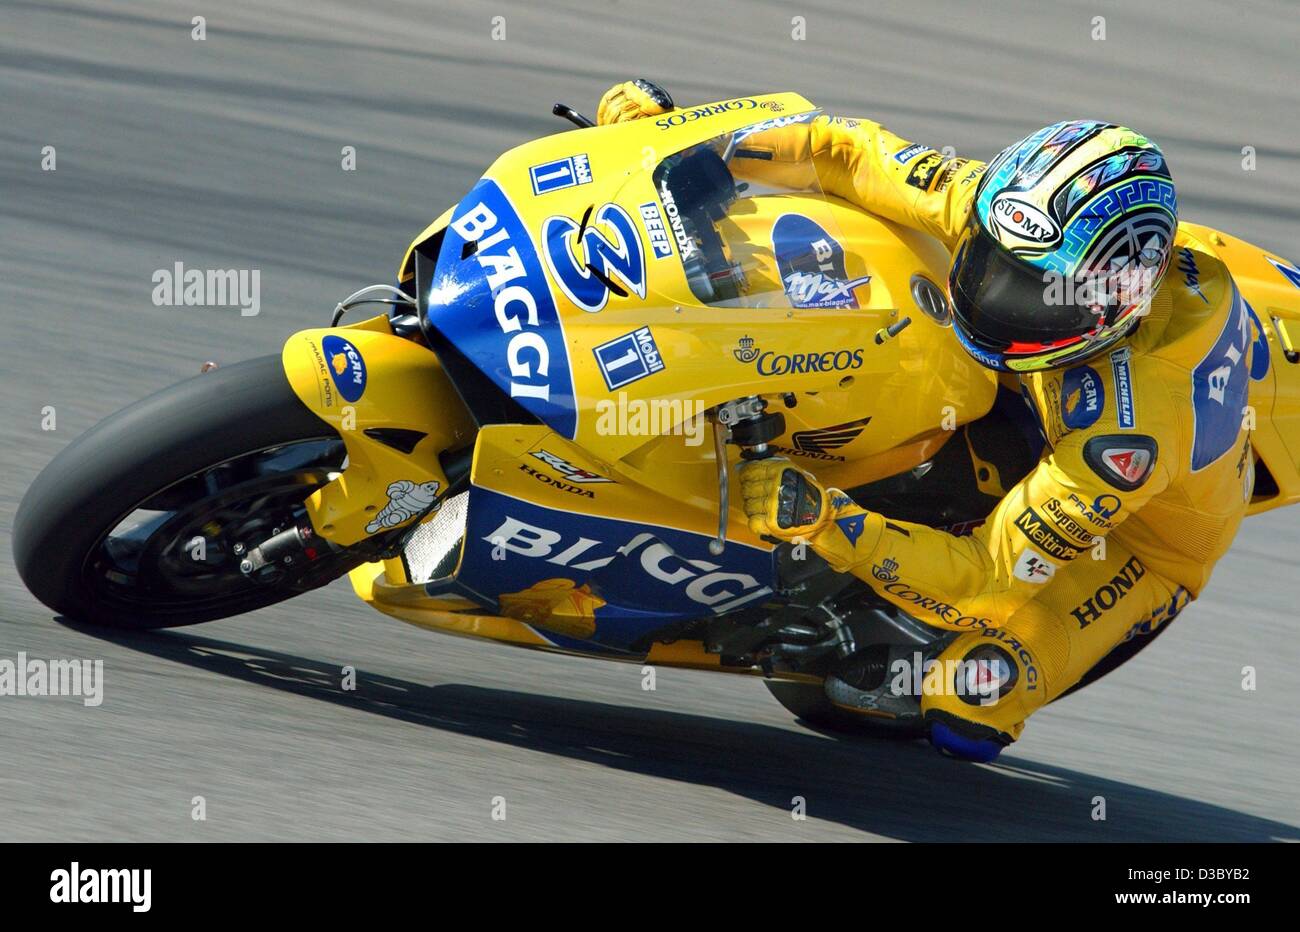 Max Biaggi High Resolution Stock Photography and Images - Alamy